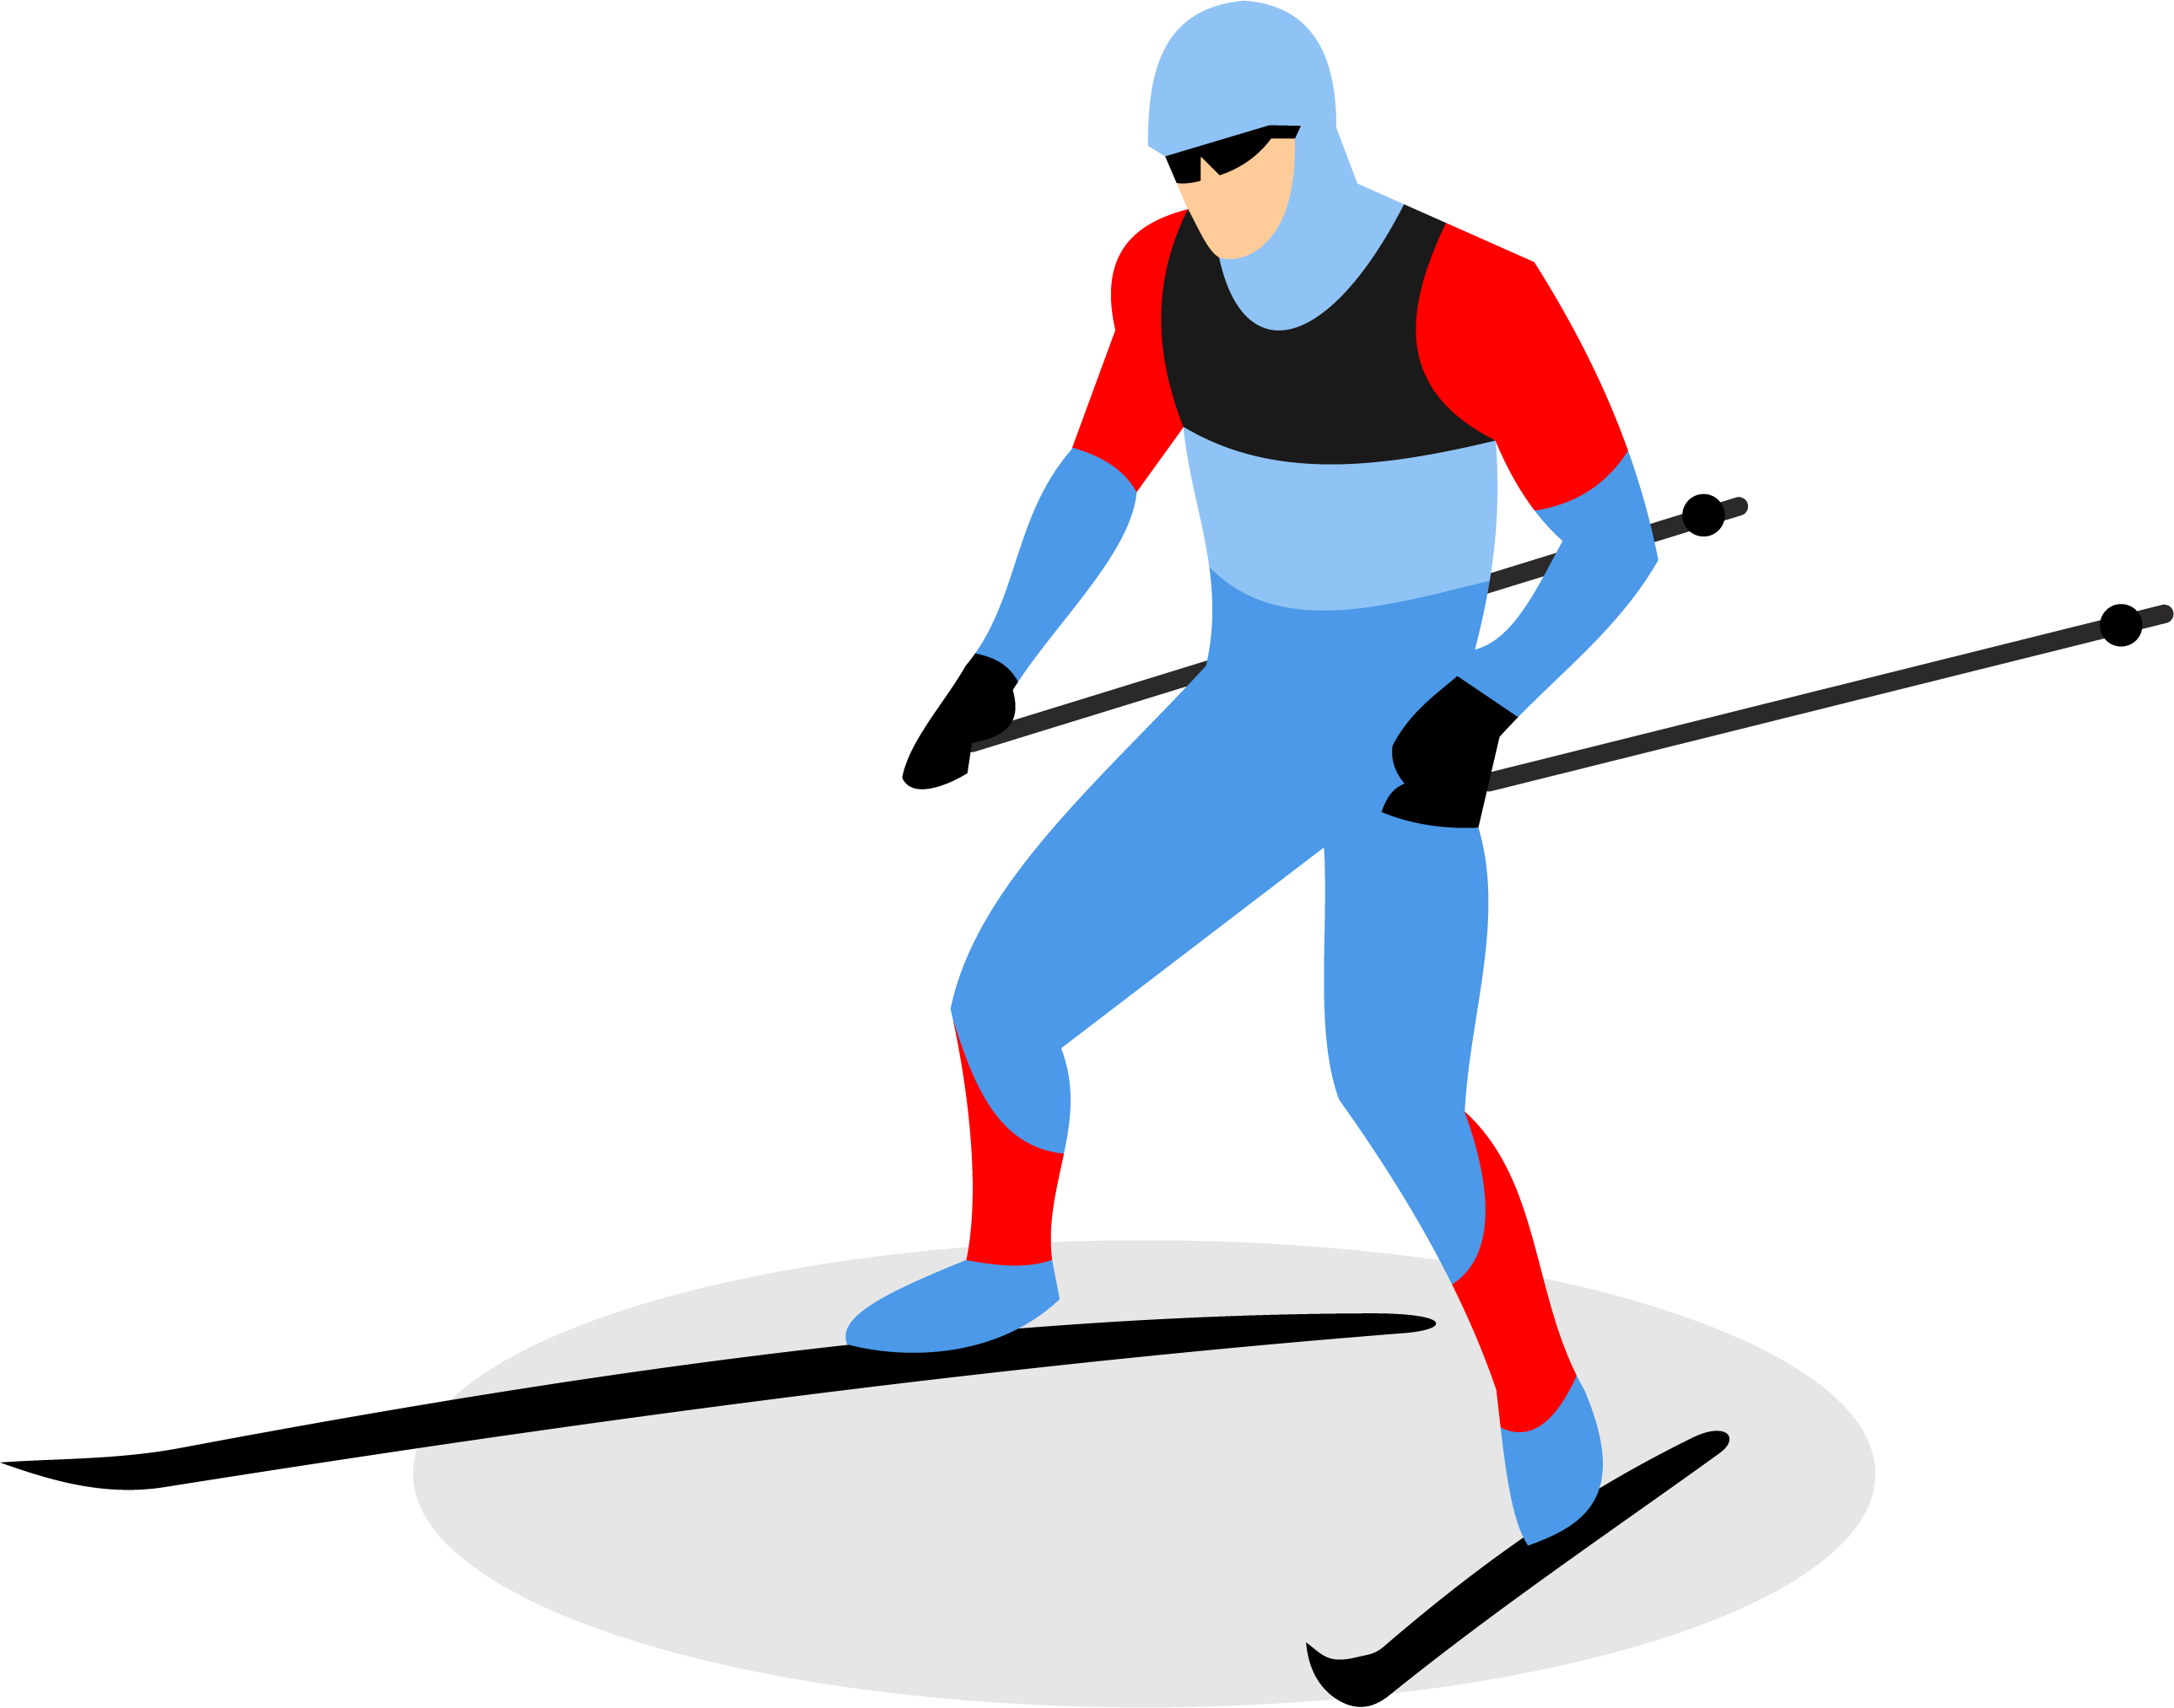 A Man In A Blue And Red Suit Skiing